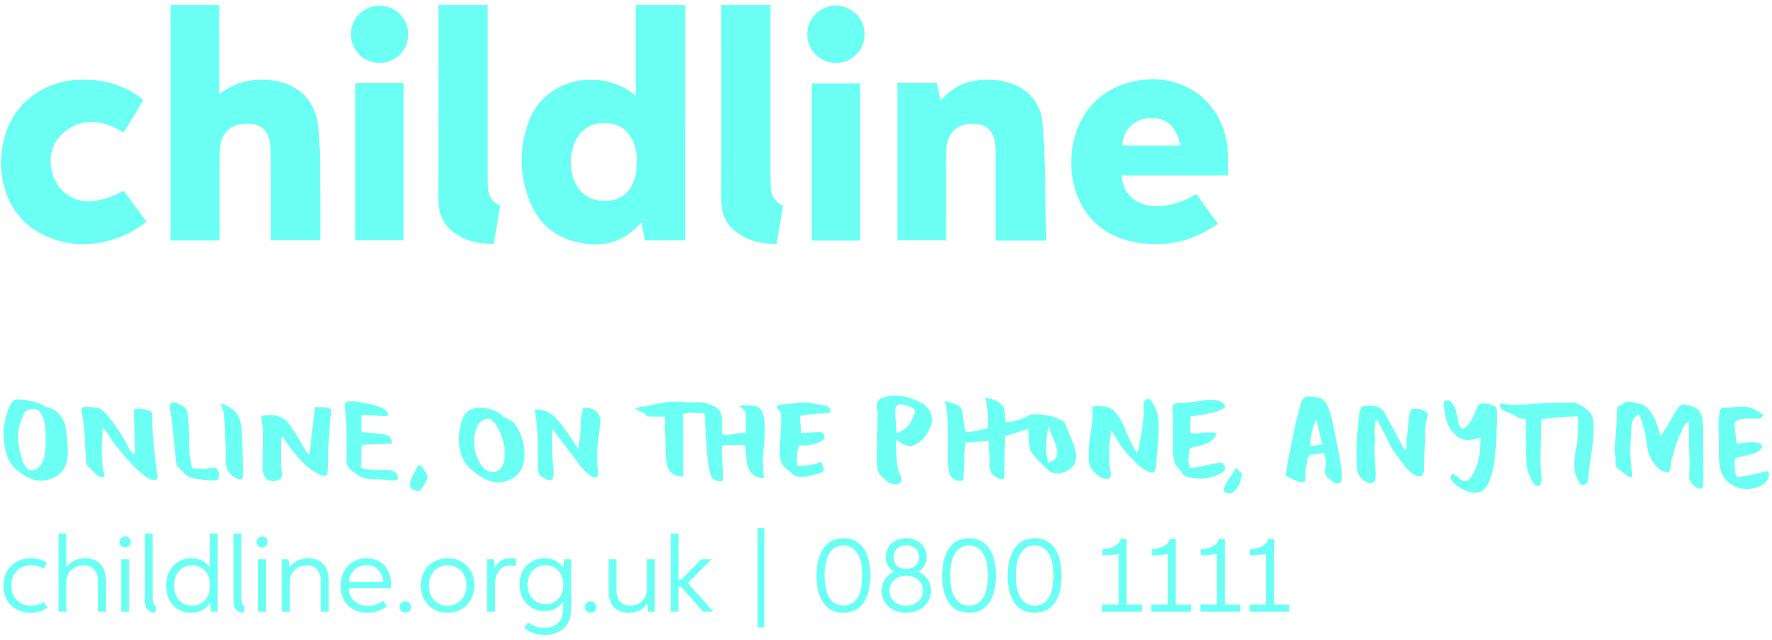 Childline is a free, private and confidential service